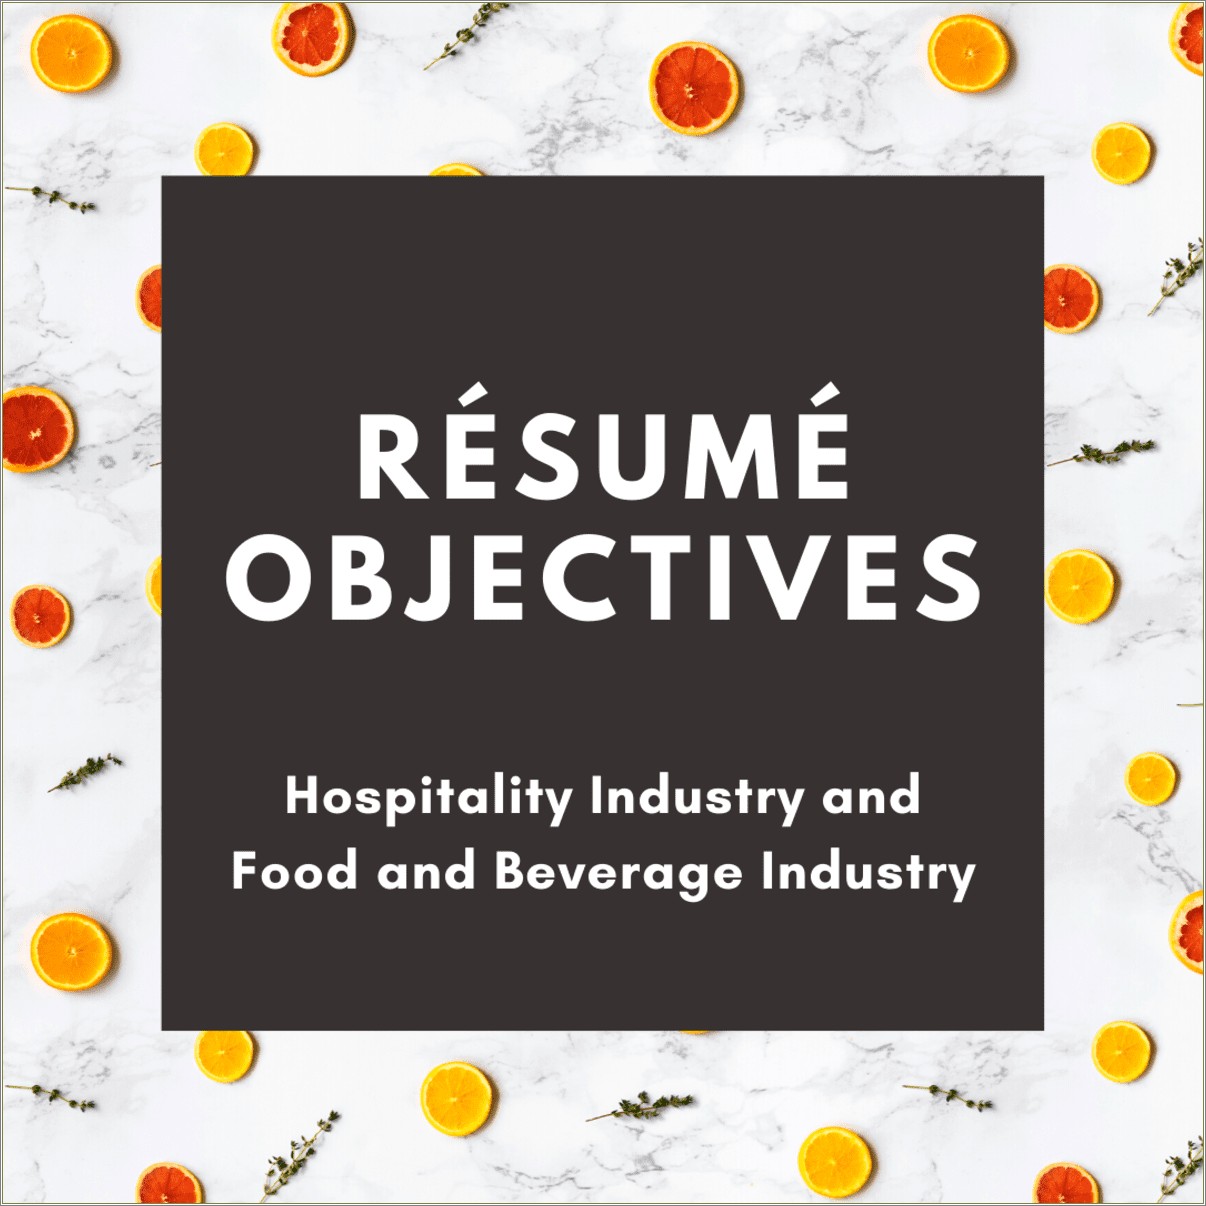 Sample Objectives To Put On A Resume